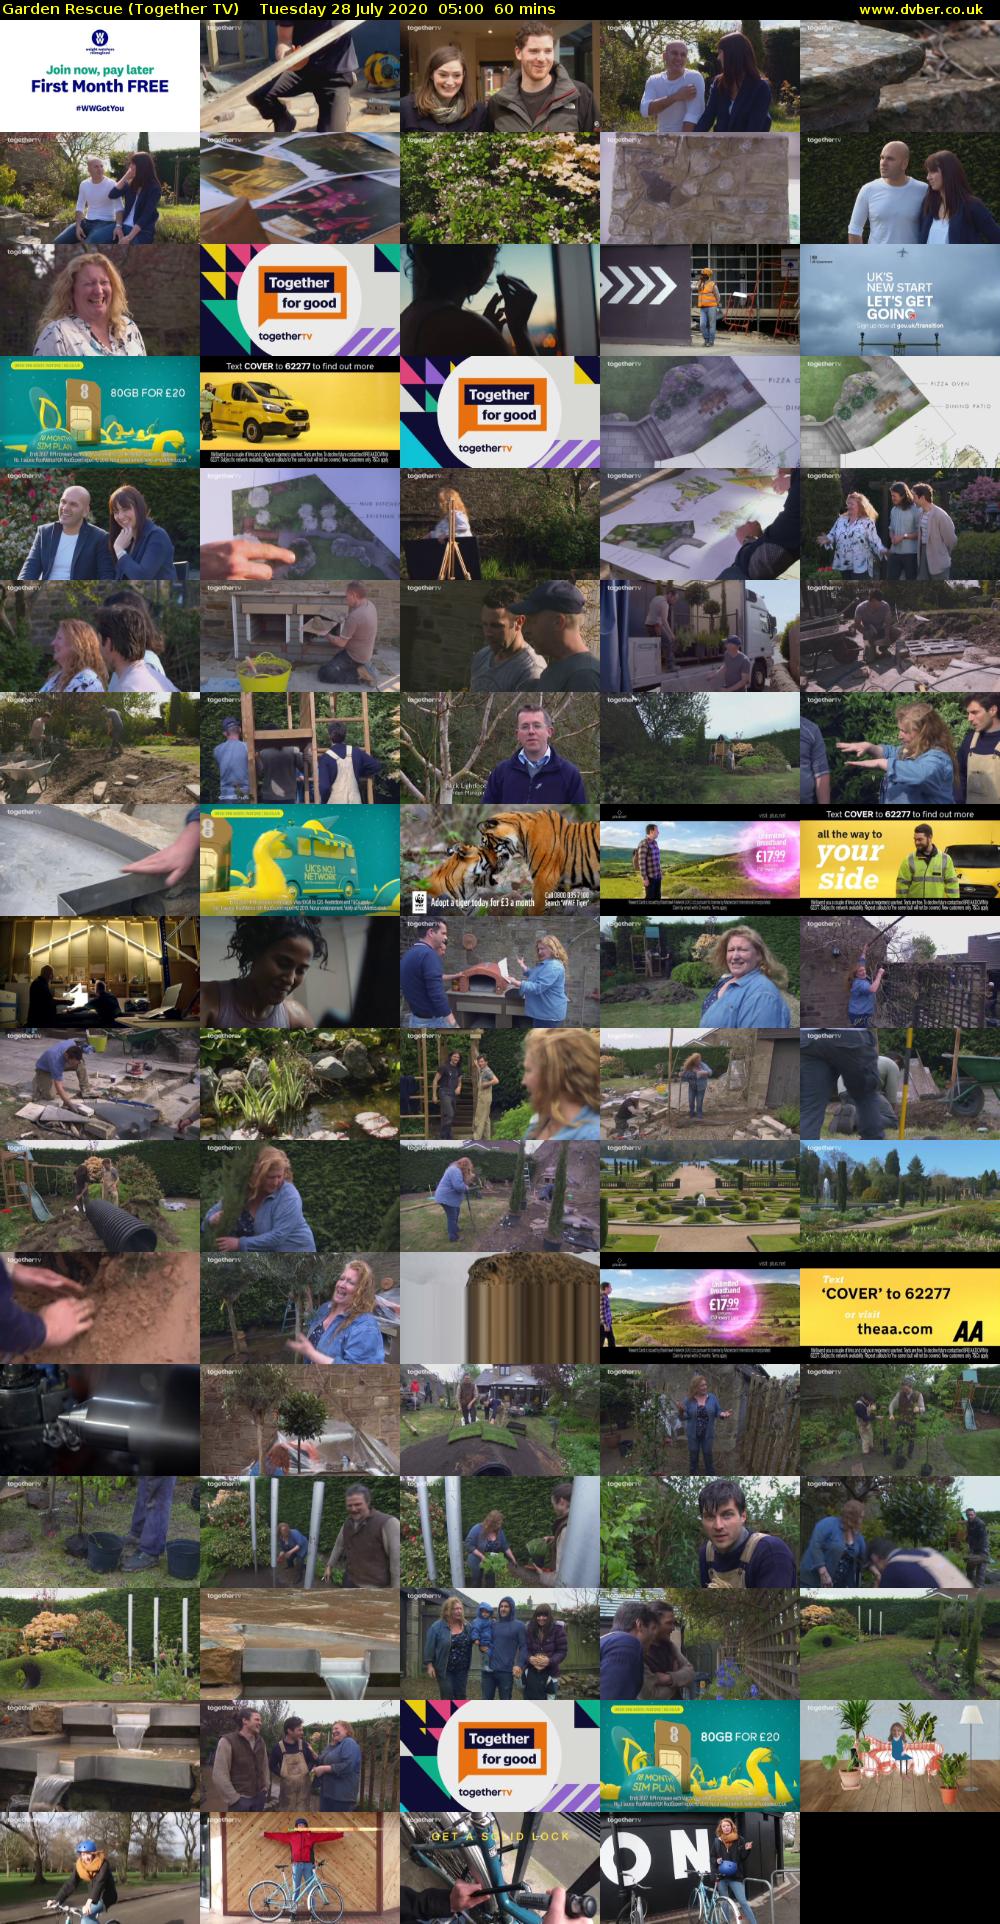 Garden Rescue (Together TV) Tuesday 28 July 2020 05:00 - 06:00